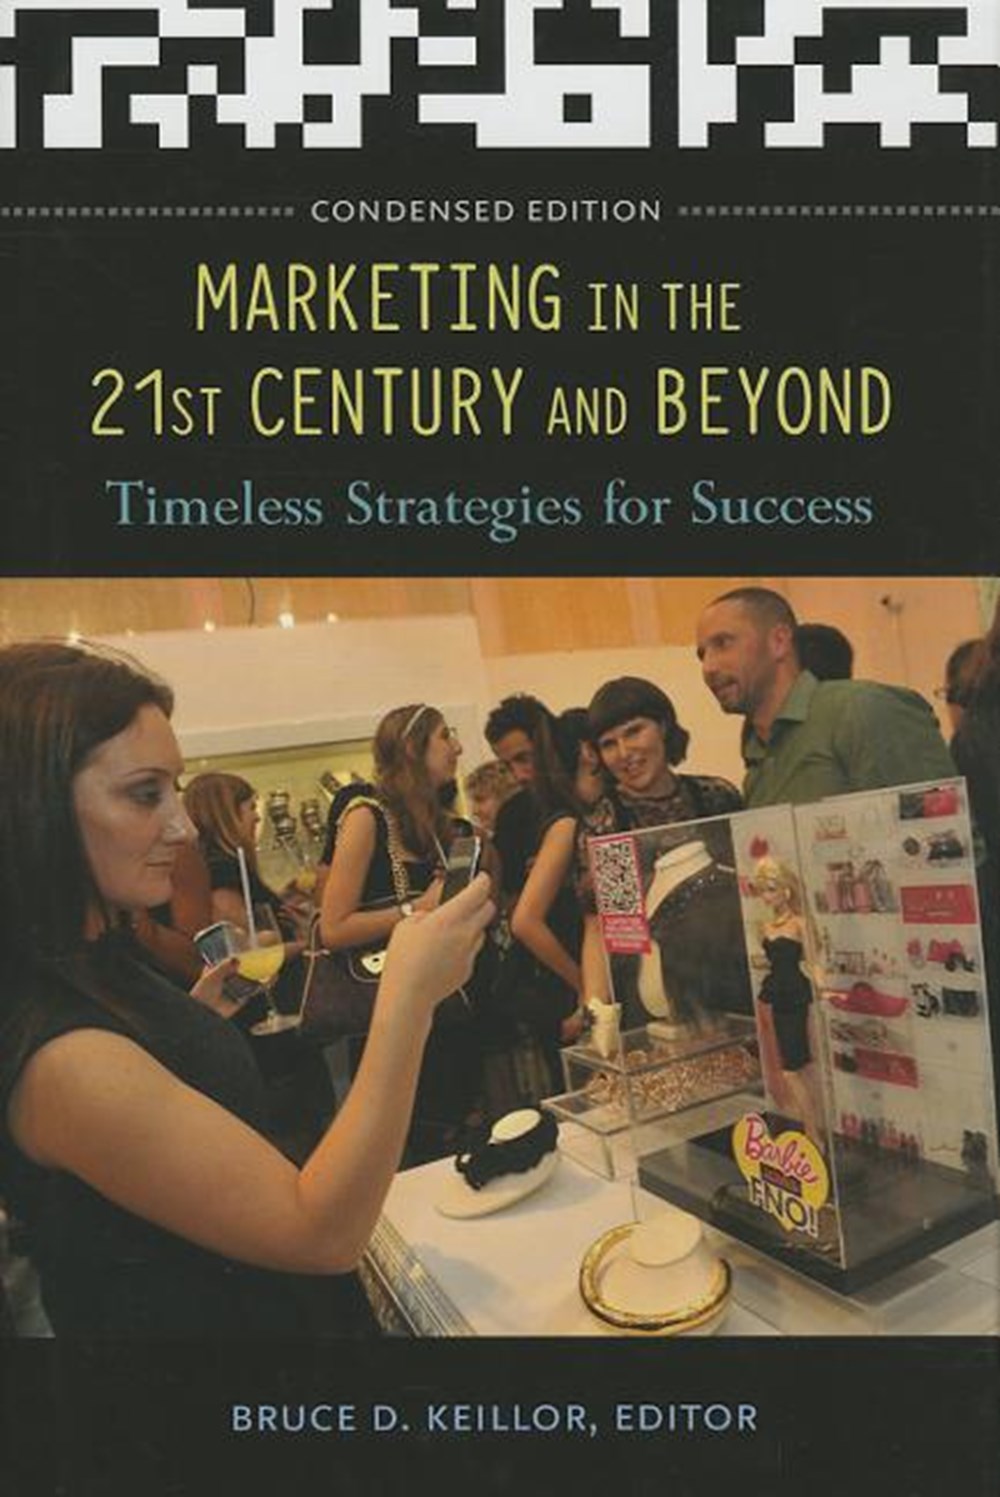 Marketing in the 21st Century and Beyond: Timeless Strategies for Success